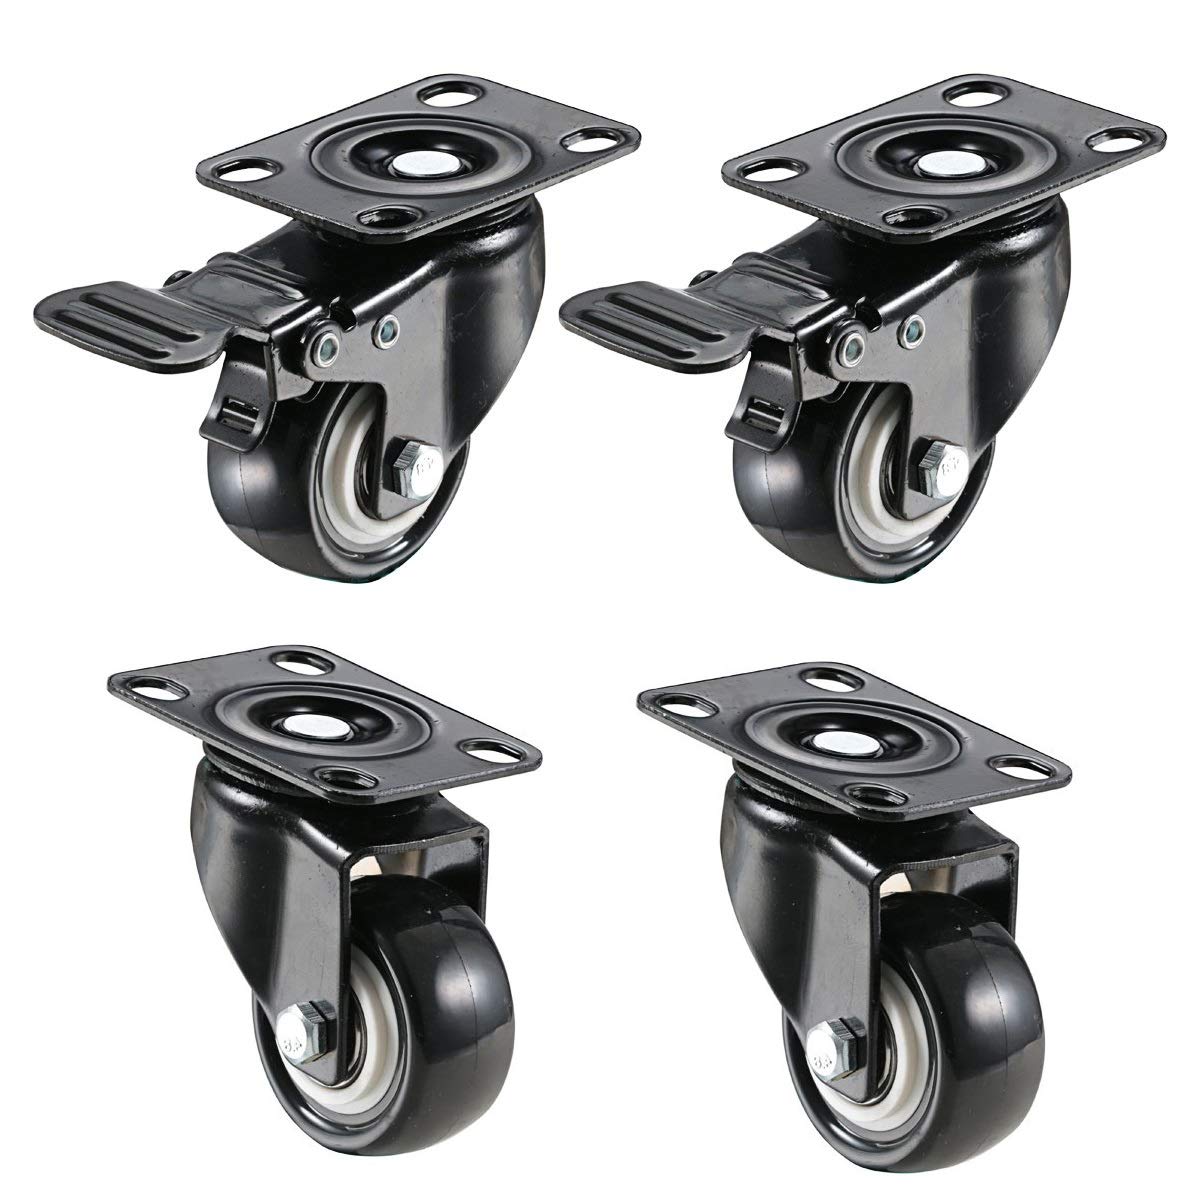 4 Pack 2" Heavy Duty Caster Wheels Soft Rubber Swivel Caster with 360 Degree (2 with Brakes & 2 Without)